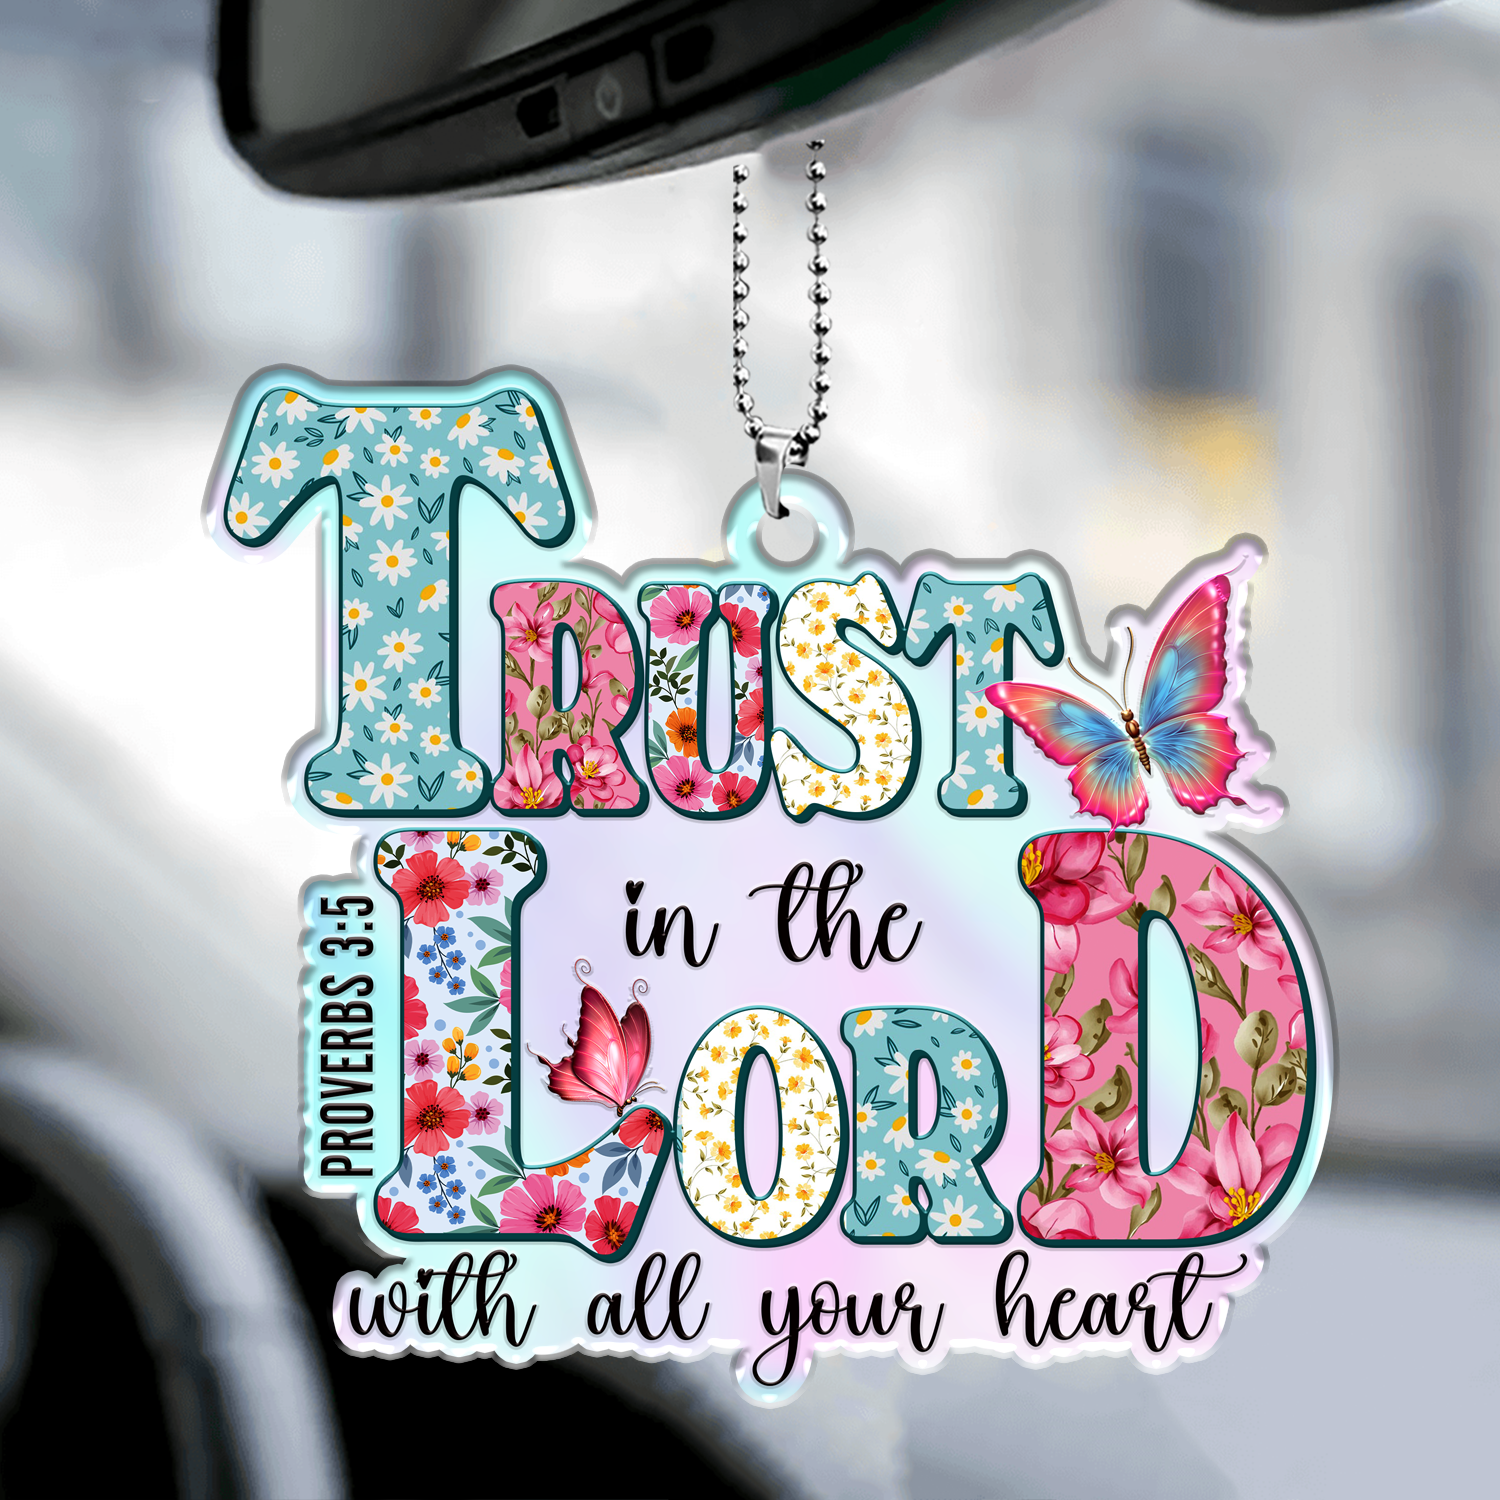 Flowers Trust In The Lord Christian Gifts For Women, Birthday Gifts For Women, Ornament Gift Bible Verse Christmas Ornament Car Hanging